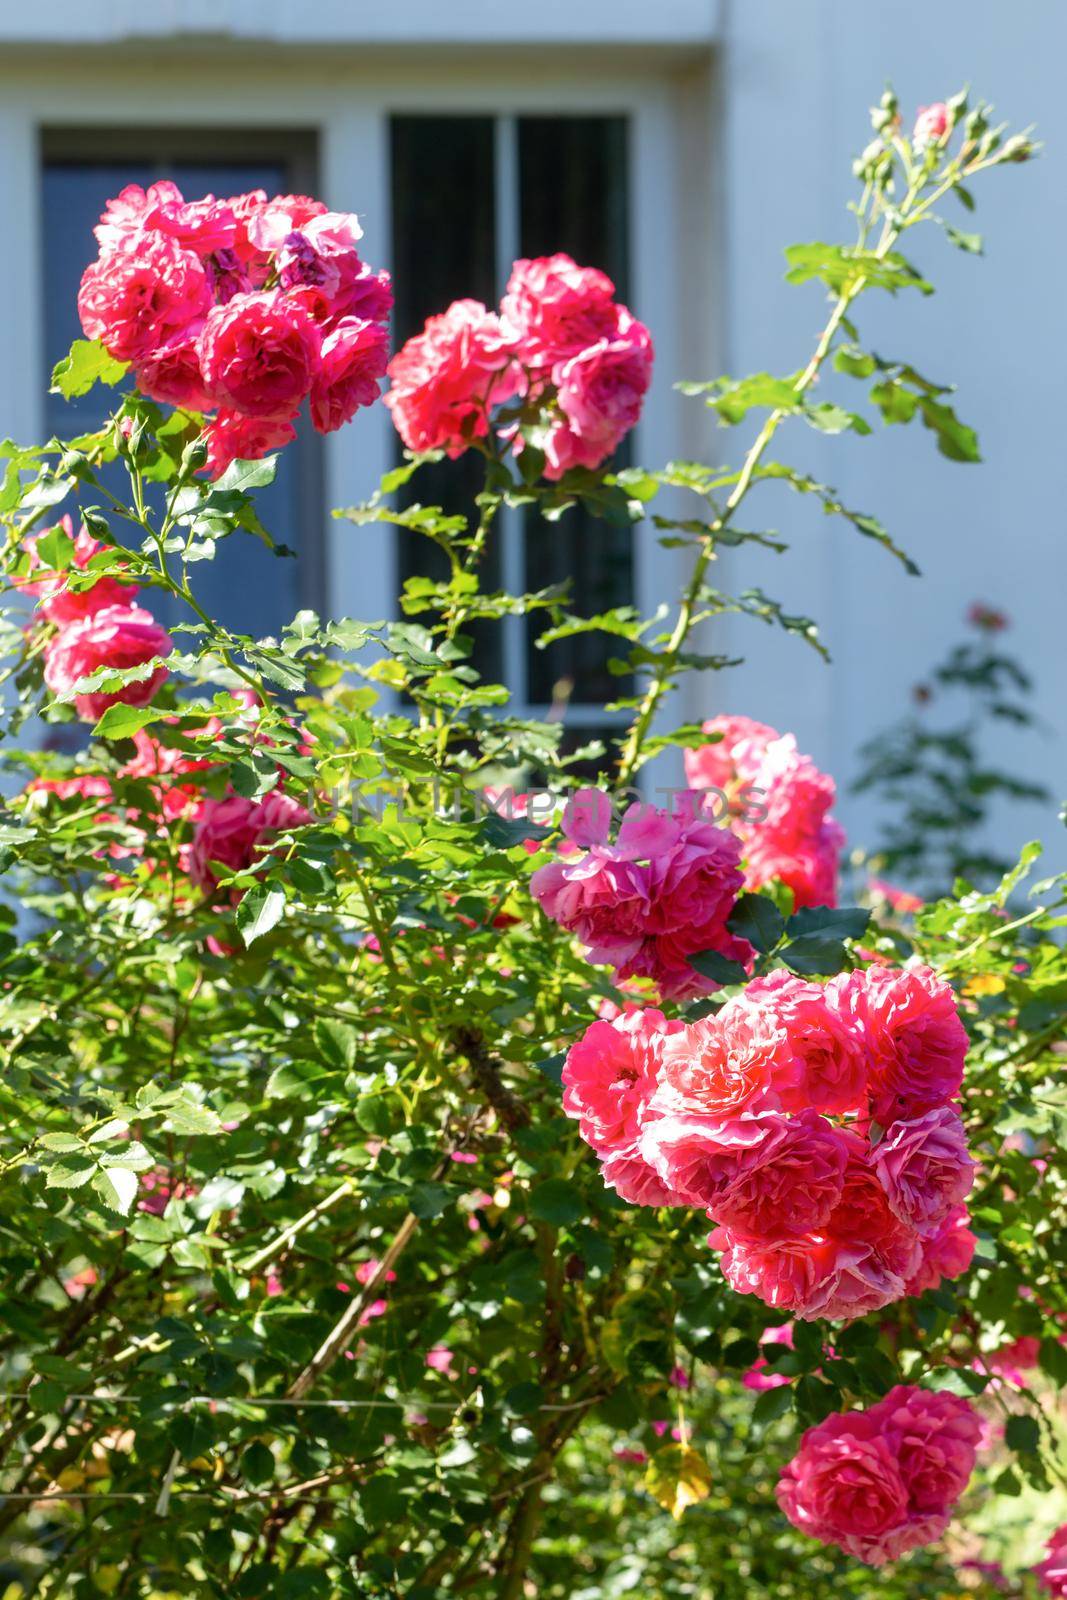 Garden rose bush on the background of a house window by clusterx